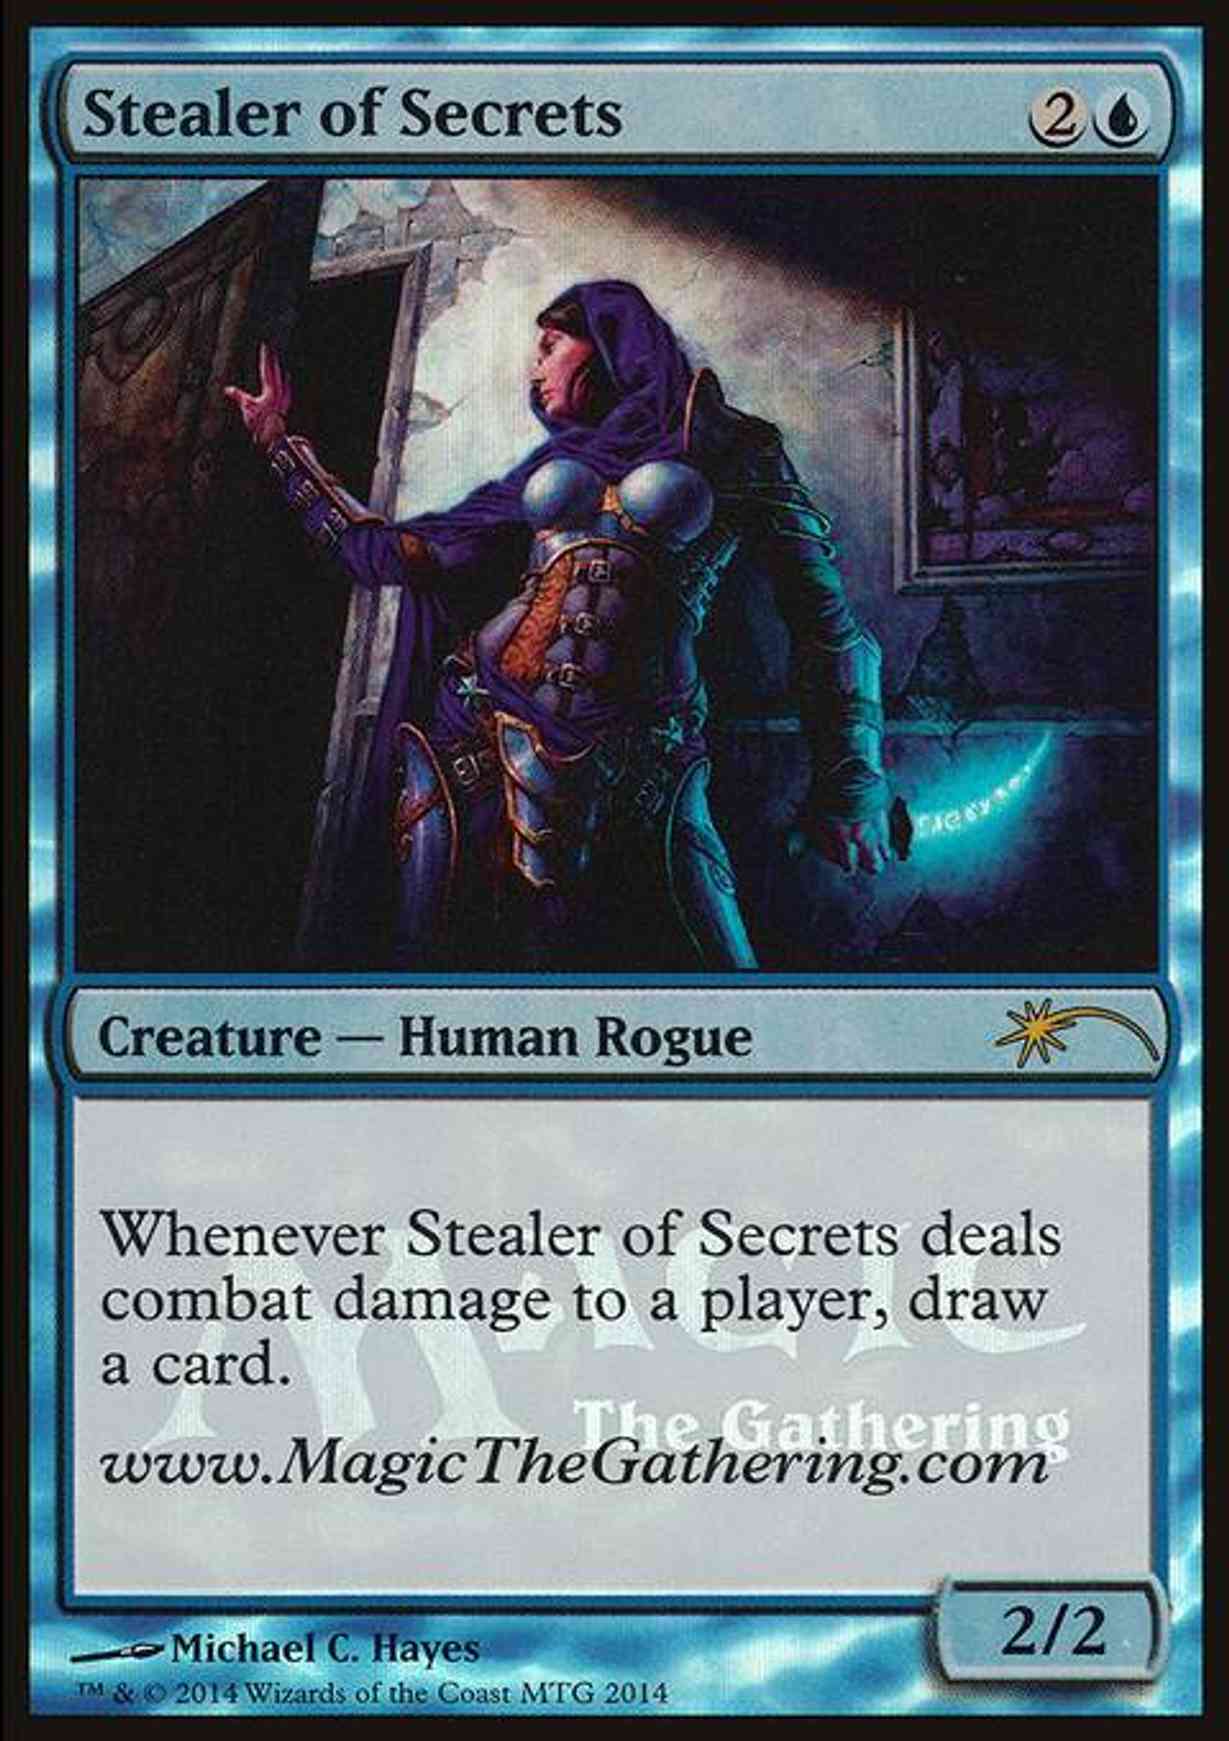 Stealer of Secrets (2014 Convention Promo) magic card front